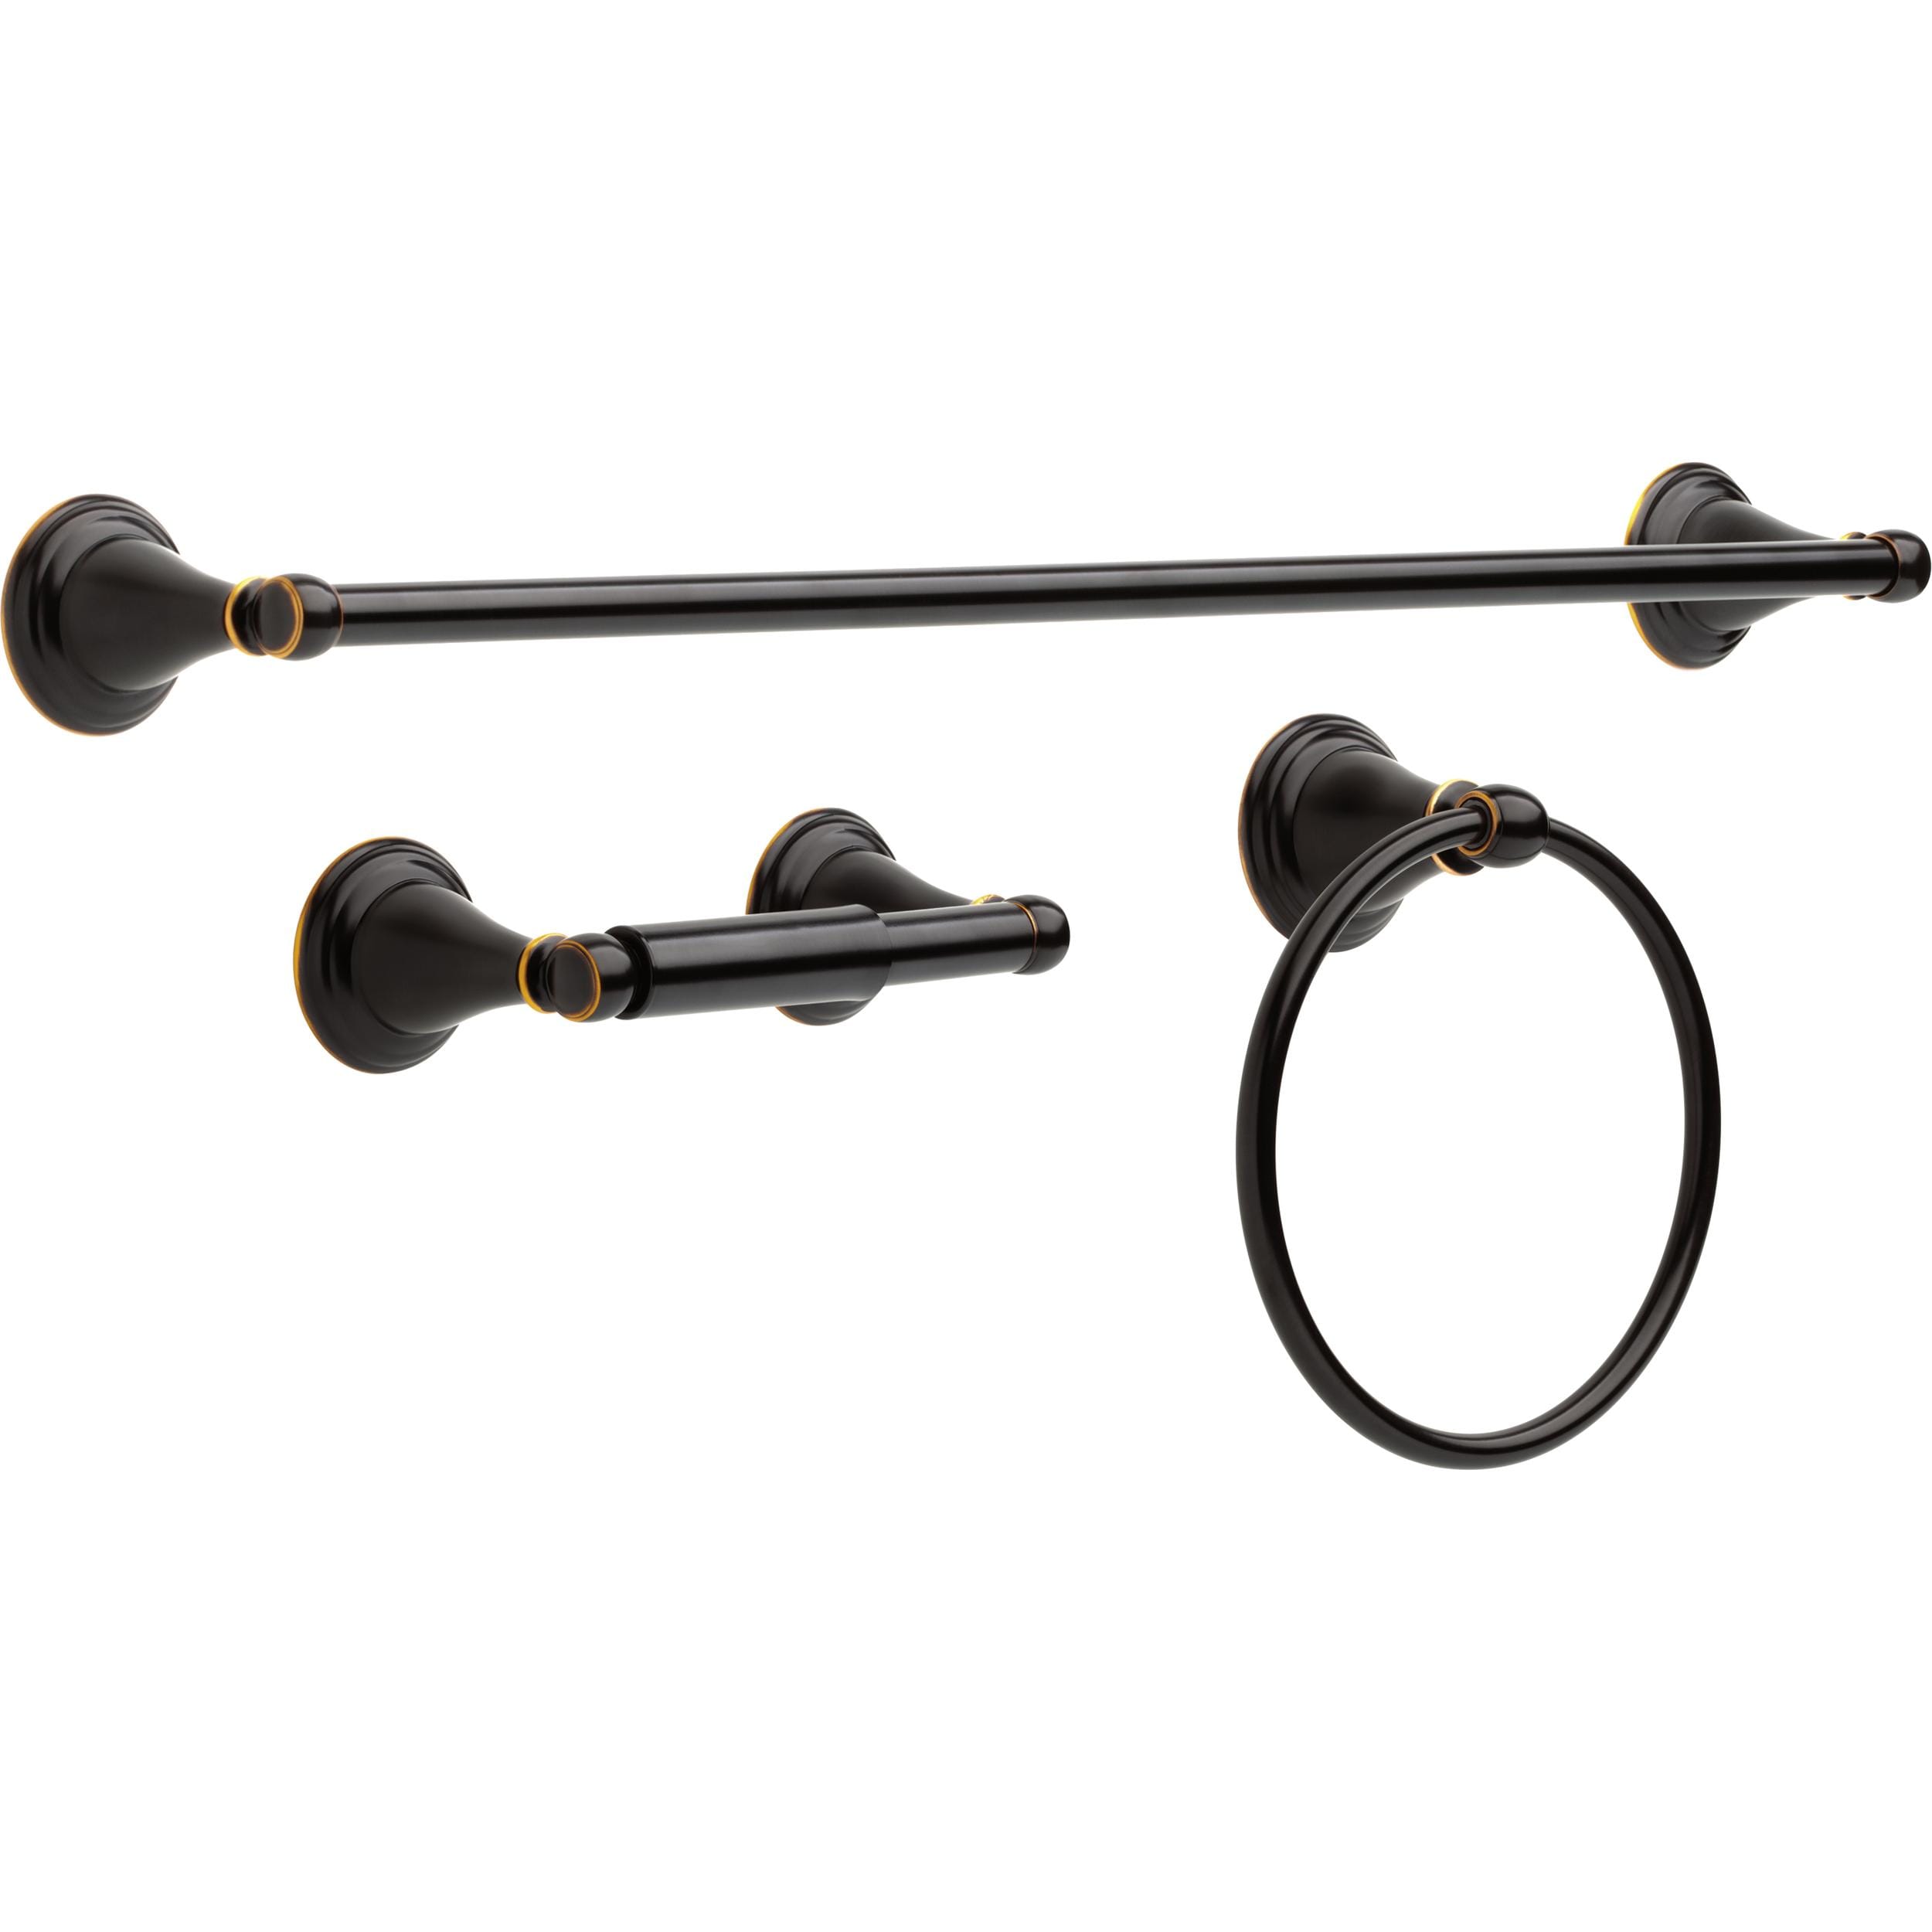 Oil Rubbed Bronze Wall Mounted Bathroom Accessories Bath Hardware Set Series 